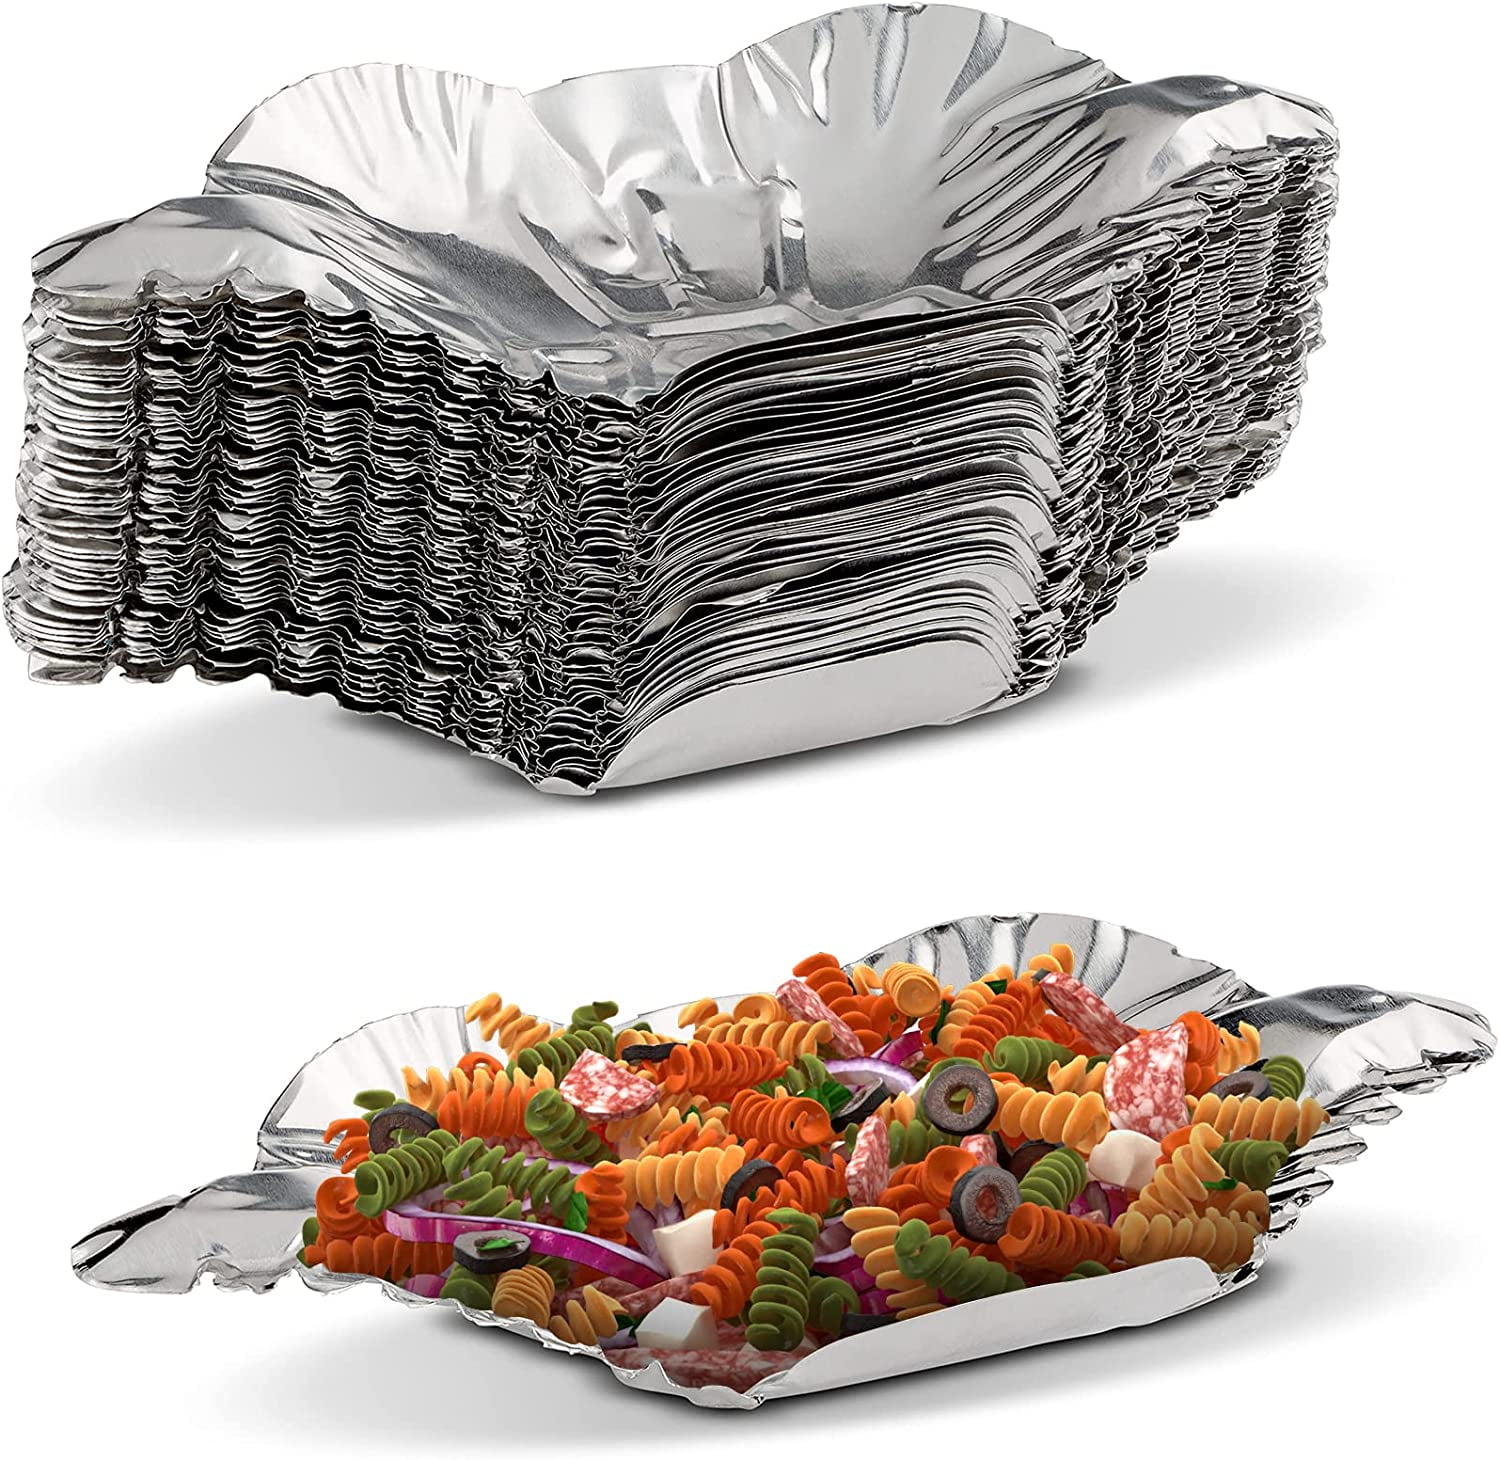 Handi-foil® Poultry Pans with Lids, 4 pk / 9.3 x 9.3 in - Fry's Food Stores